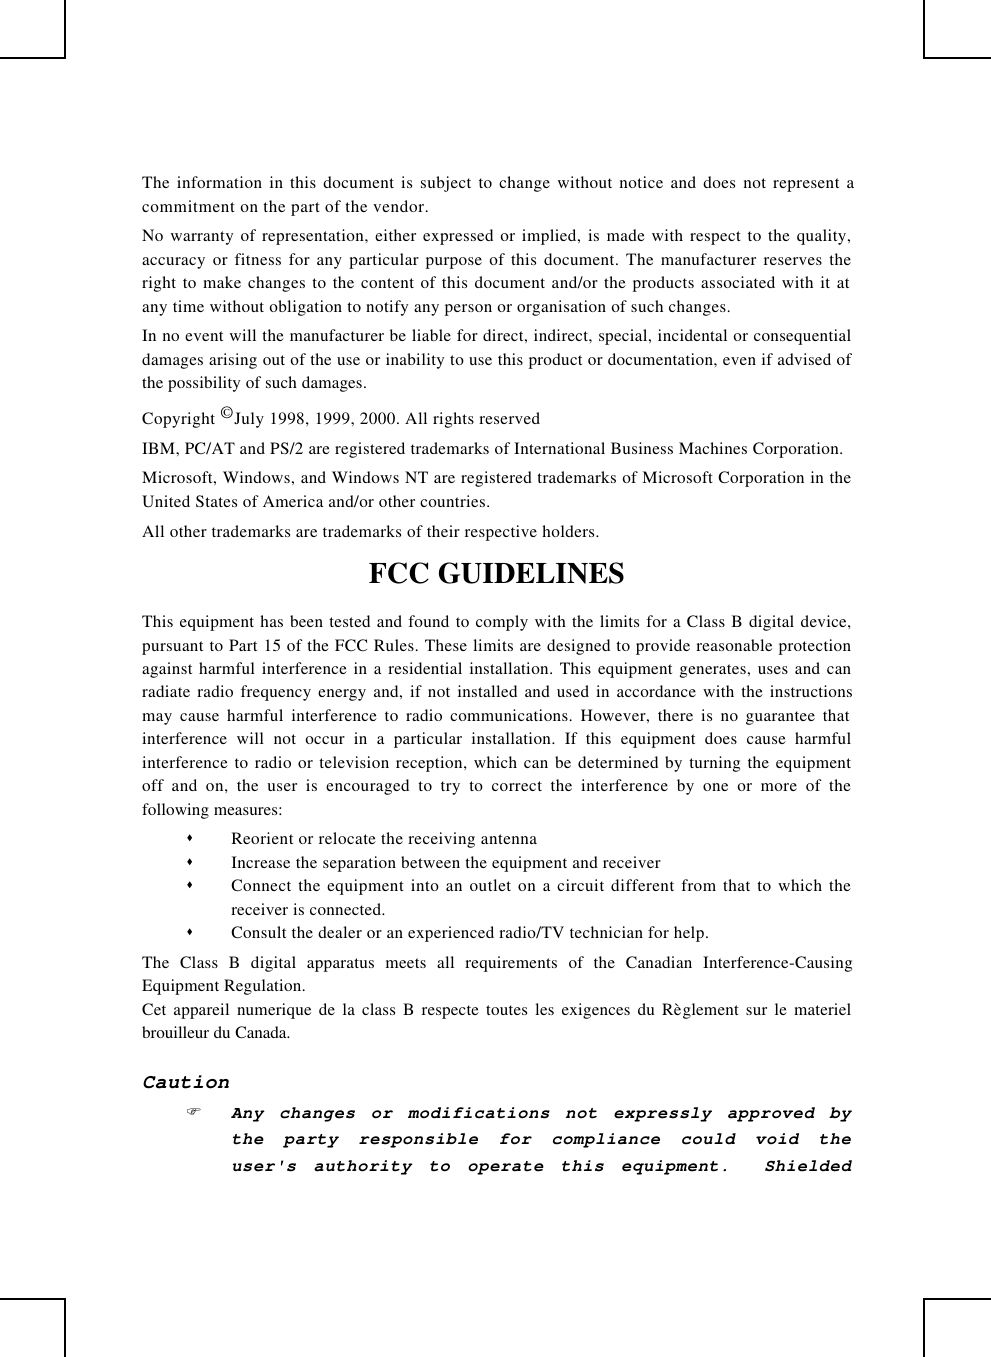 The information in this document is subject to change without notice and does not represent acommitment on the part of the vendor.No warranty of representation, either expressed or implied, is made with respect to the quality,accuracy or fitness for any particular purpose of this document. The manufacturer reserves theright to make changes to the content of this document and/or the products associated with it atany time without obligation to notify any person or organisation of such changes.In no event will the manufacturer be liable for direct, indirect, special, incidental or consequentialdamages arising out of the use or inability to use this product or documentation, even if advised ofthe possibility of such damages.Copyright © July 1998, 1999, 2000. All rights reservedIBM, PC/AT and PS/2 are registered trademarks of International Business Machines Corporation.Microsoft, Windows, and Windows NT are registered trademarks of Microsoft Corporation in theUnited States of America and/or other countries.All other trademarks are trademarks of their respective holders.FCC GUIDELINESThis equipment has been tested and found to comply with the limits for a Class B digital device,pursuant to Part 15 of the FCC Rules. These limits are designed to provide reasonable protectionagainst harmful interference in a residential installation. This equipment generates, uses and canradiate radio frequency energy and, if not installed and used in accordance with the instructionsmay cause harmful interference to radio communications. However, there is no guarantee thatinterference will not occur in a particular installation. If this equipment does cause harmfulinterference to radio or television reception, which can be determined by turning the equipmentoff and on, the user is encouraged to try to correct the interference by one or more of thefollowing measures:s Reorient or relocate the receiving antennas Increase the separation between the equipment and receivers Connect the equipment into an outlet on a circuit different from that to which thereceiver is connected.s Consult the dealer or an experienced radio/TV technician for help.The Class B digital apparatus meets all requirements of the Canadian Interference-CausingEquipment Regulation.Cet appareil numerique de la class B respecte toutes les exigences du Règlement sur le materielbrouilleur du Canada.CautionF Any changes or modifications not expressly approved bythe party responsible for compliance could void theuser&apos;s authority to operate this equipment.  Shielded